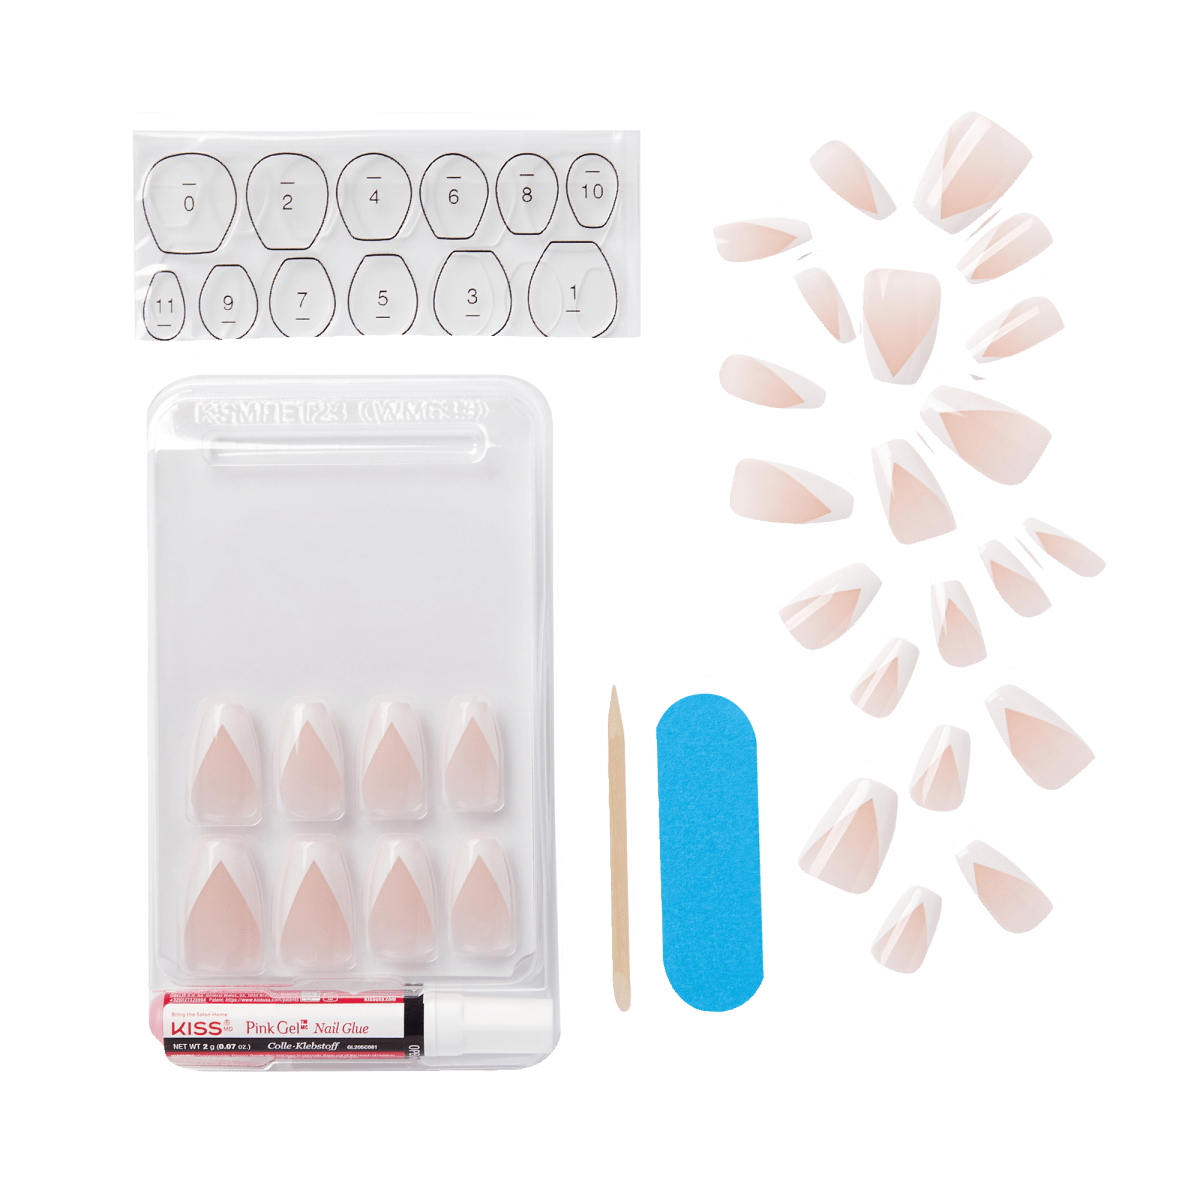 KISS Classy Nails, Press-On Nails, Silk Dress, White, Med Coffin, 28ct